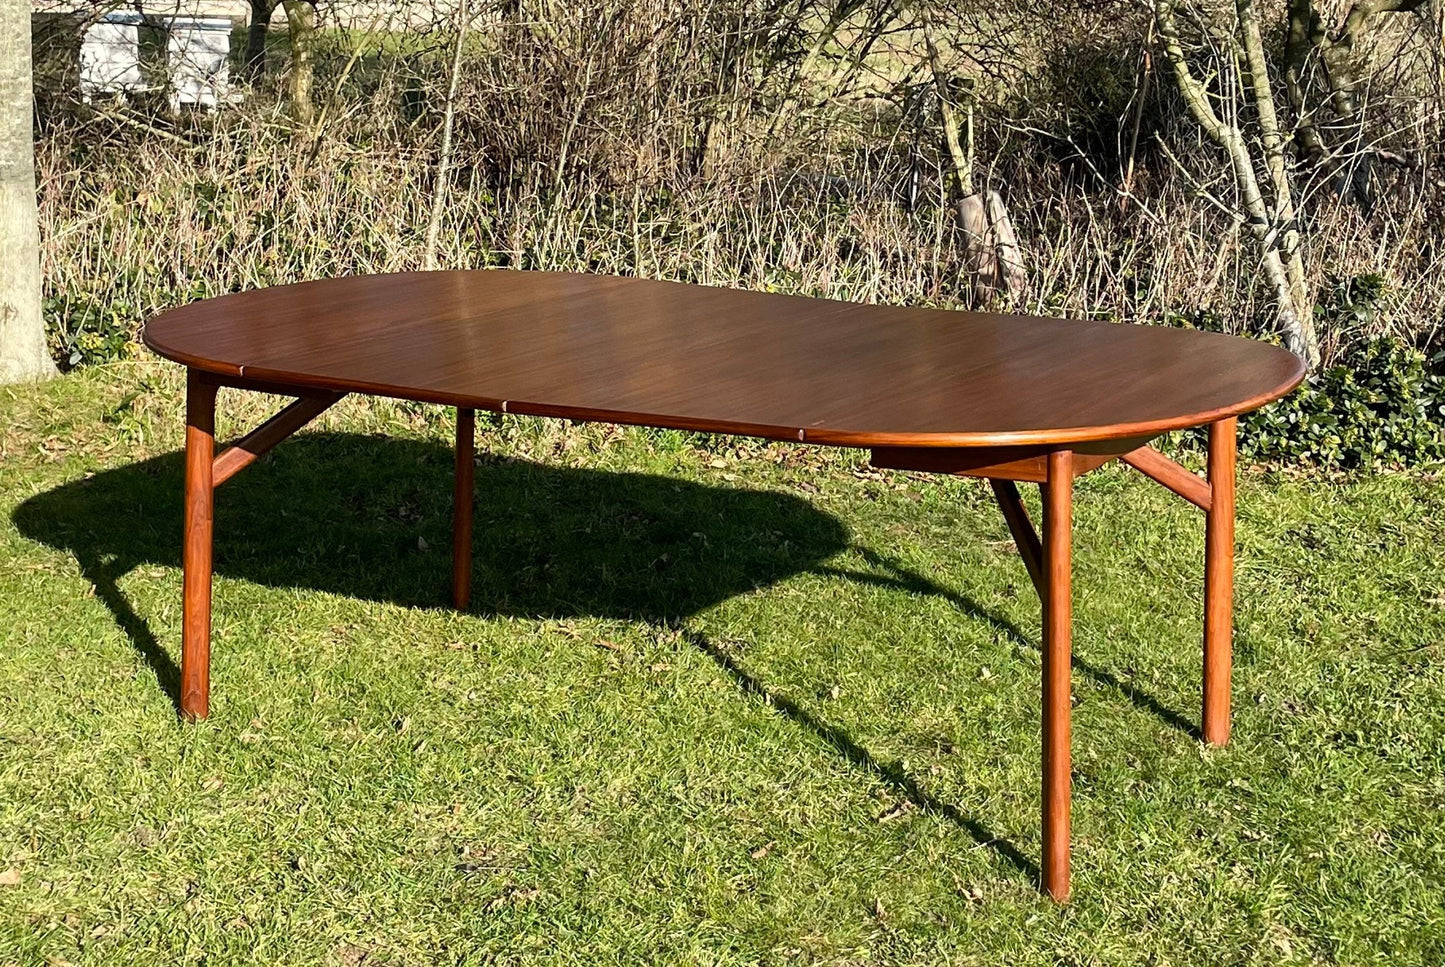 For Robert and Sarah *** Mid Century Danish teak dining table Price includes shipping.